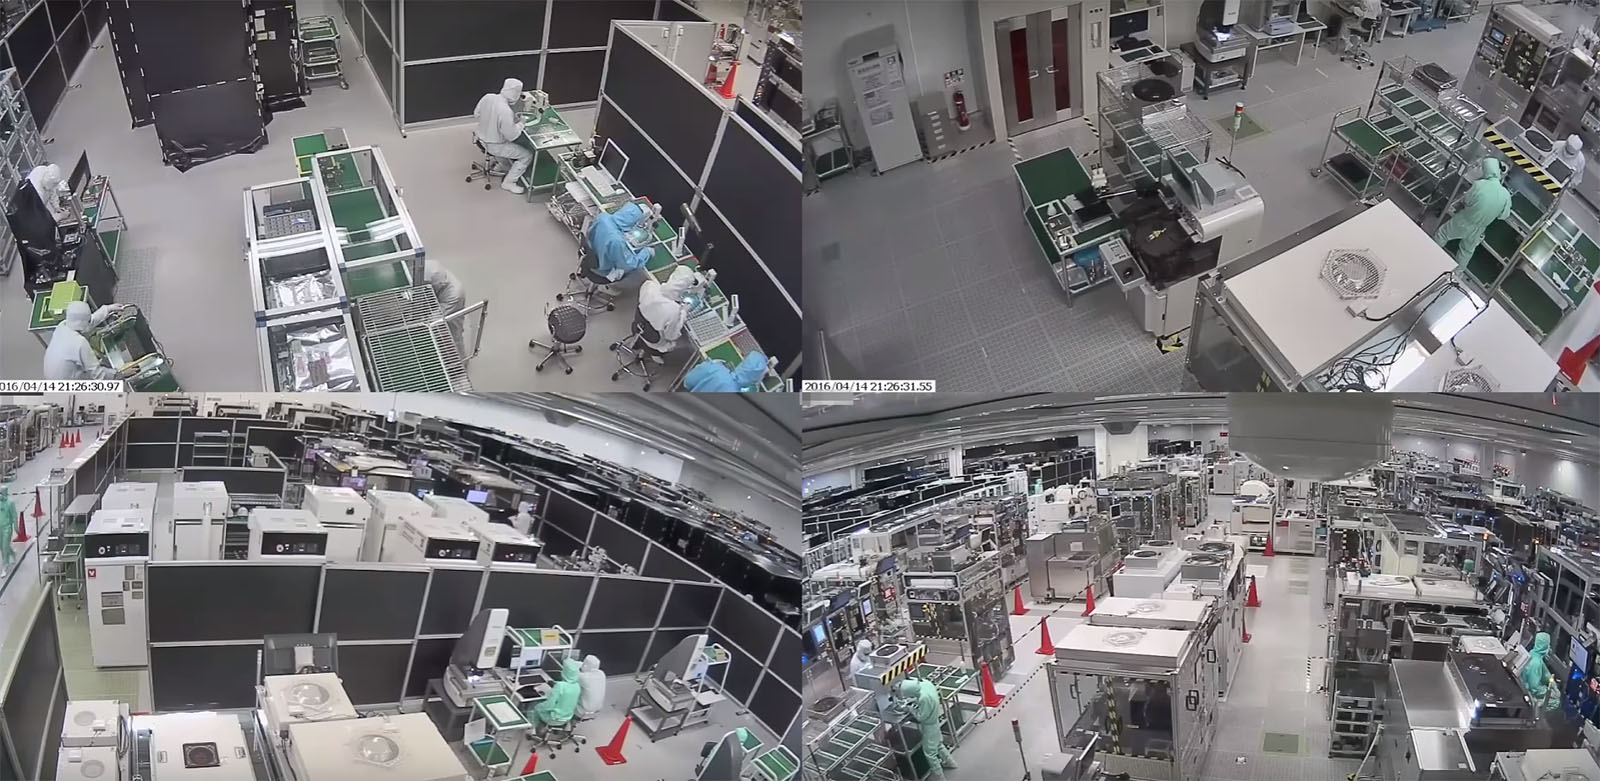 The First Video of Sonys Sensor Plant Getting Devastated by Earthquakes